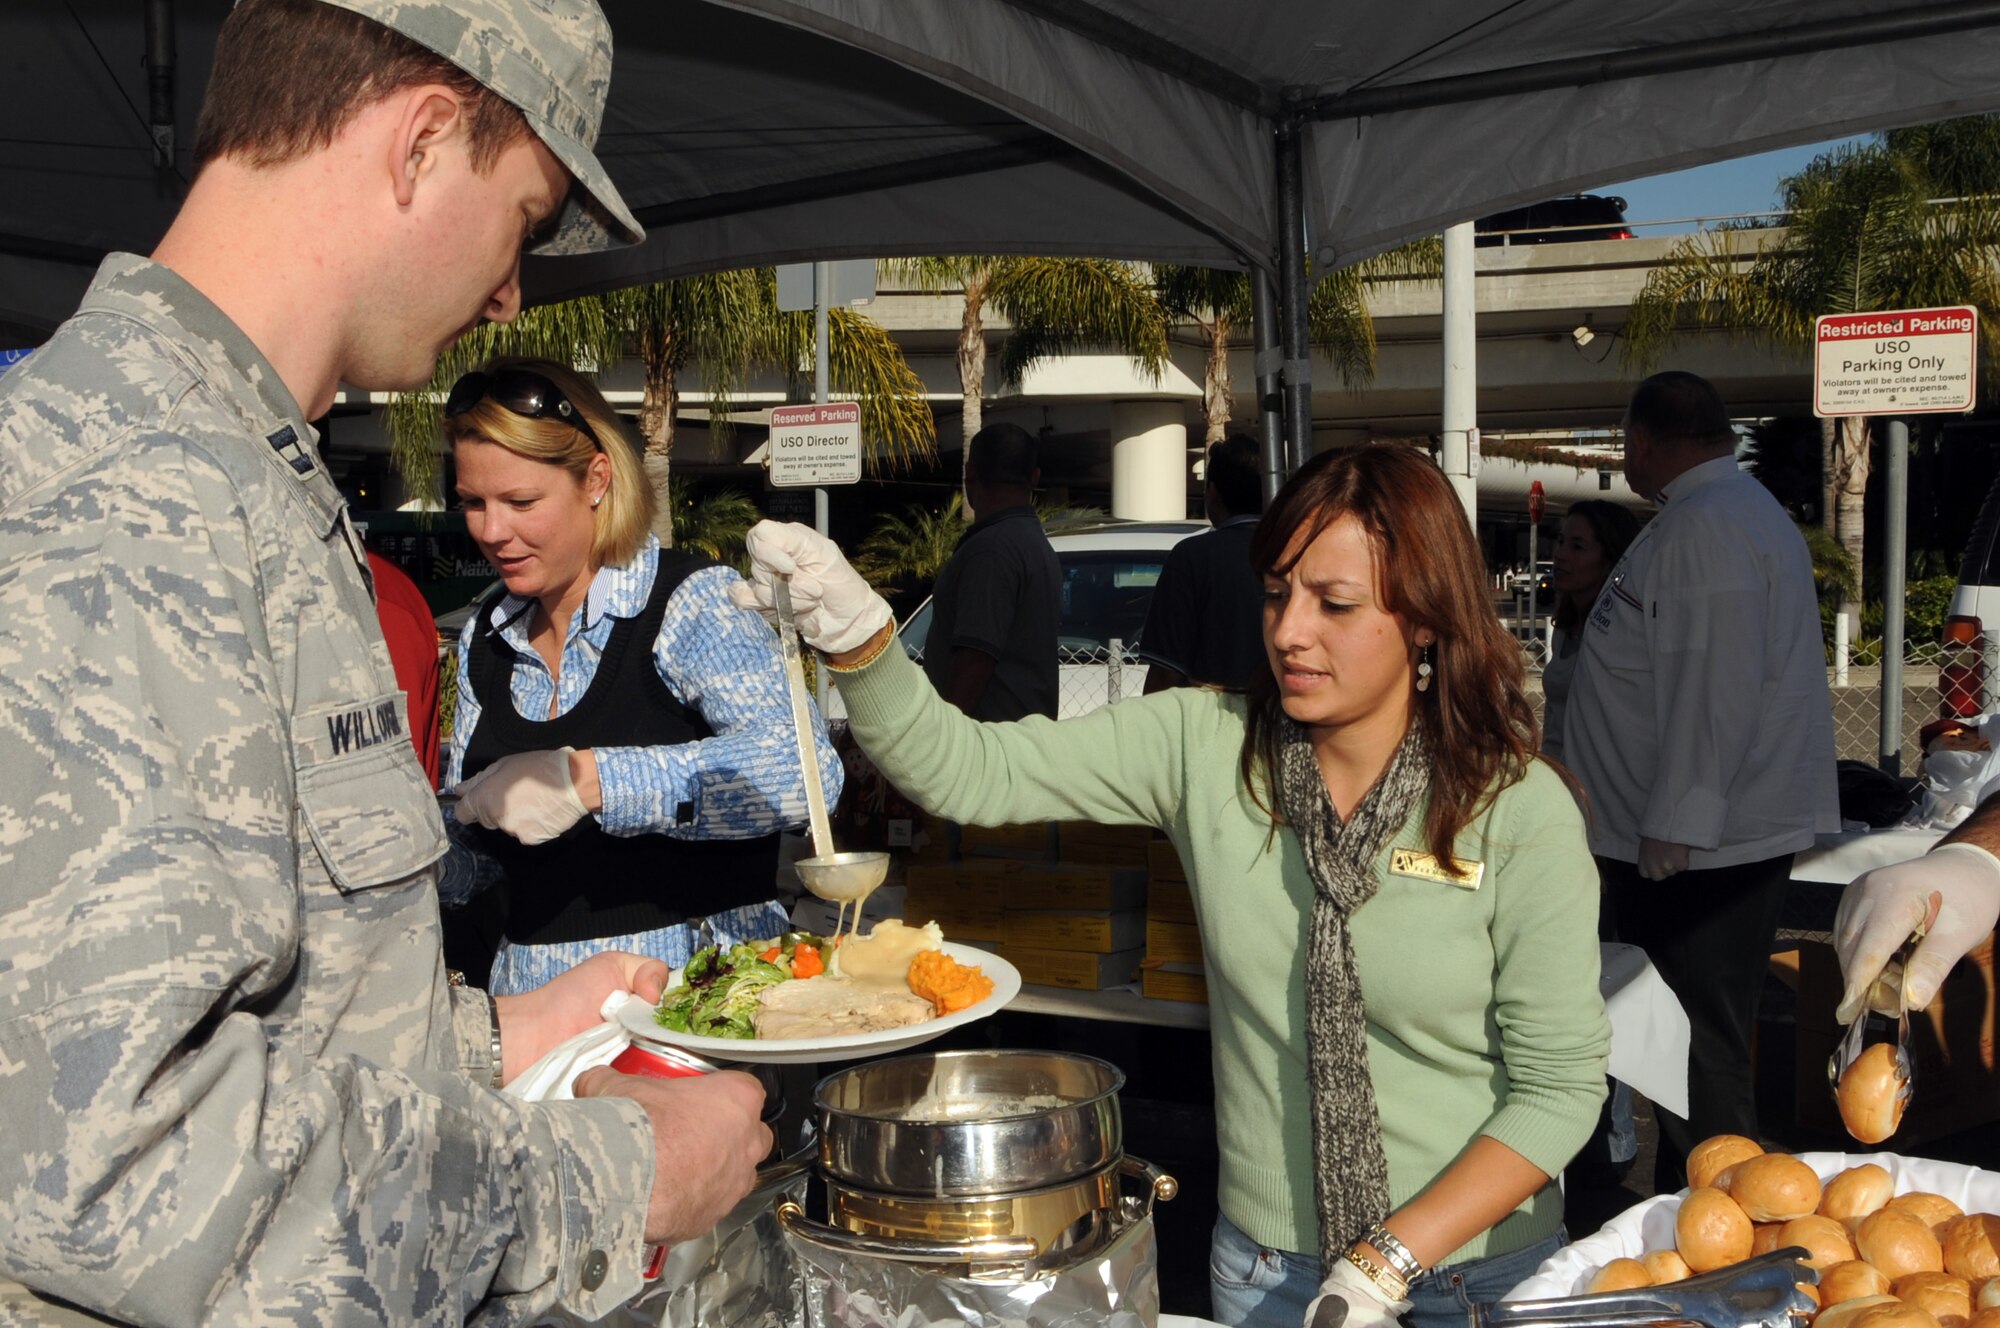 A member of the Air Force is served a free meal by a USO volunteer during the Bob Hope Hollywood USO's “Salute to Our Military Personnel” at Los Angeles International Airport, Nov. 24.  Local and other military troops passing through LAX were treated to an afternoon of pre-Thanksgiving lunch and entertainment.  (Photo by Joe Juarez)